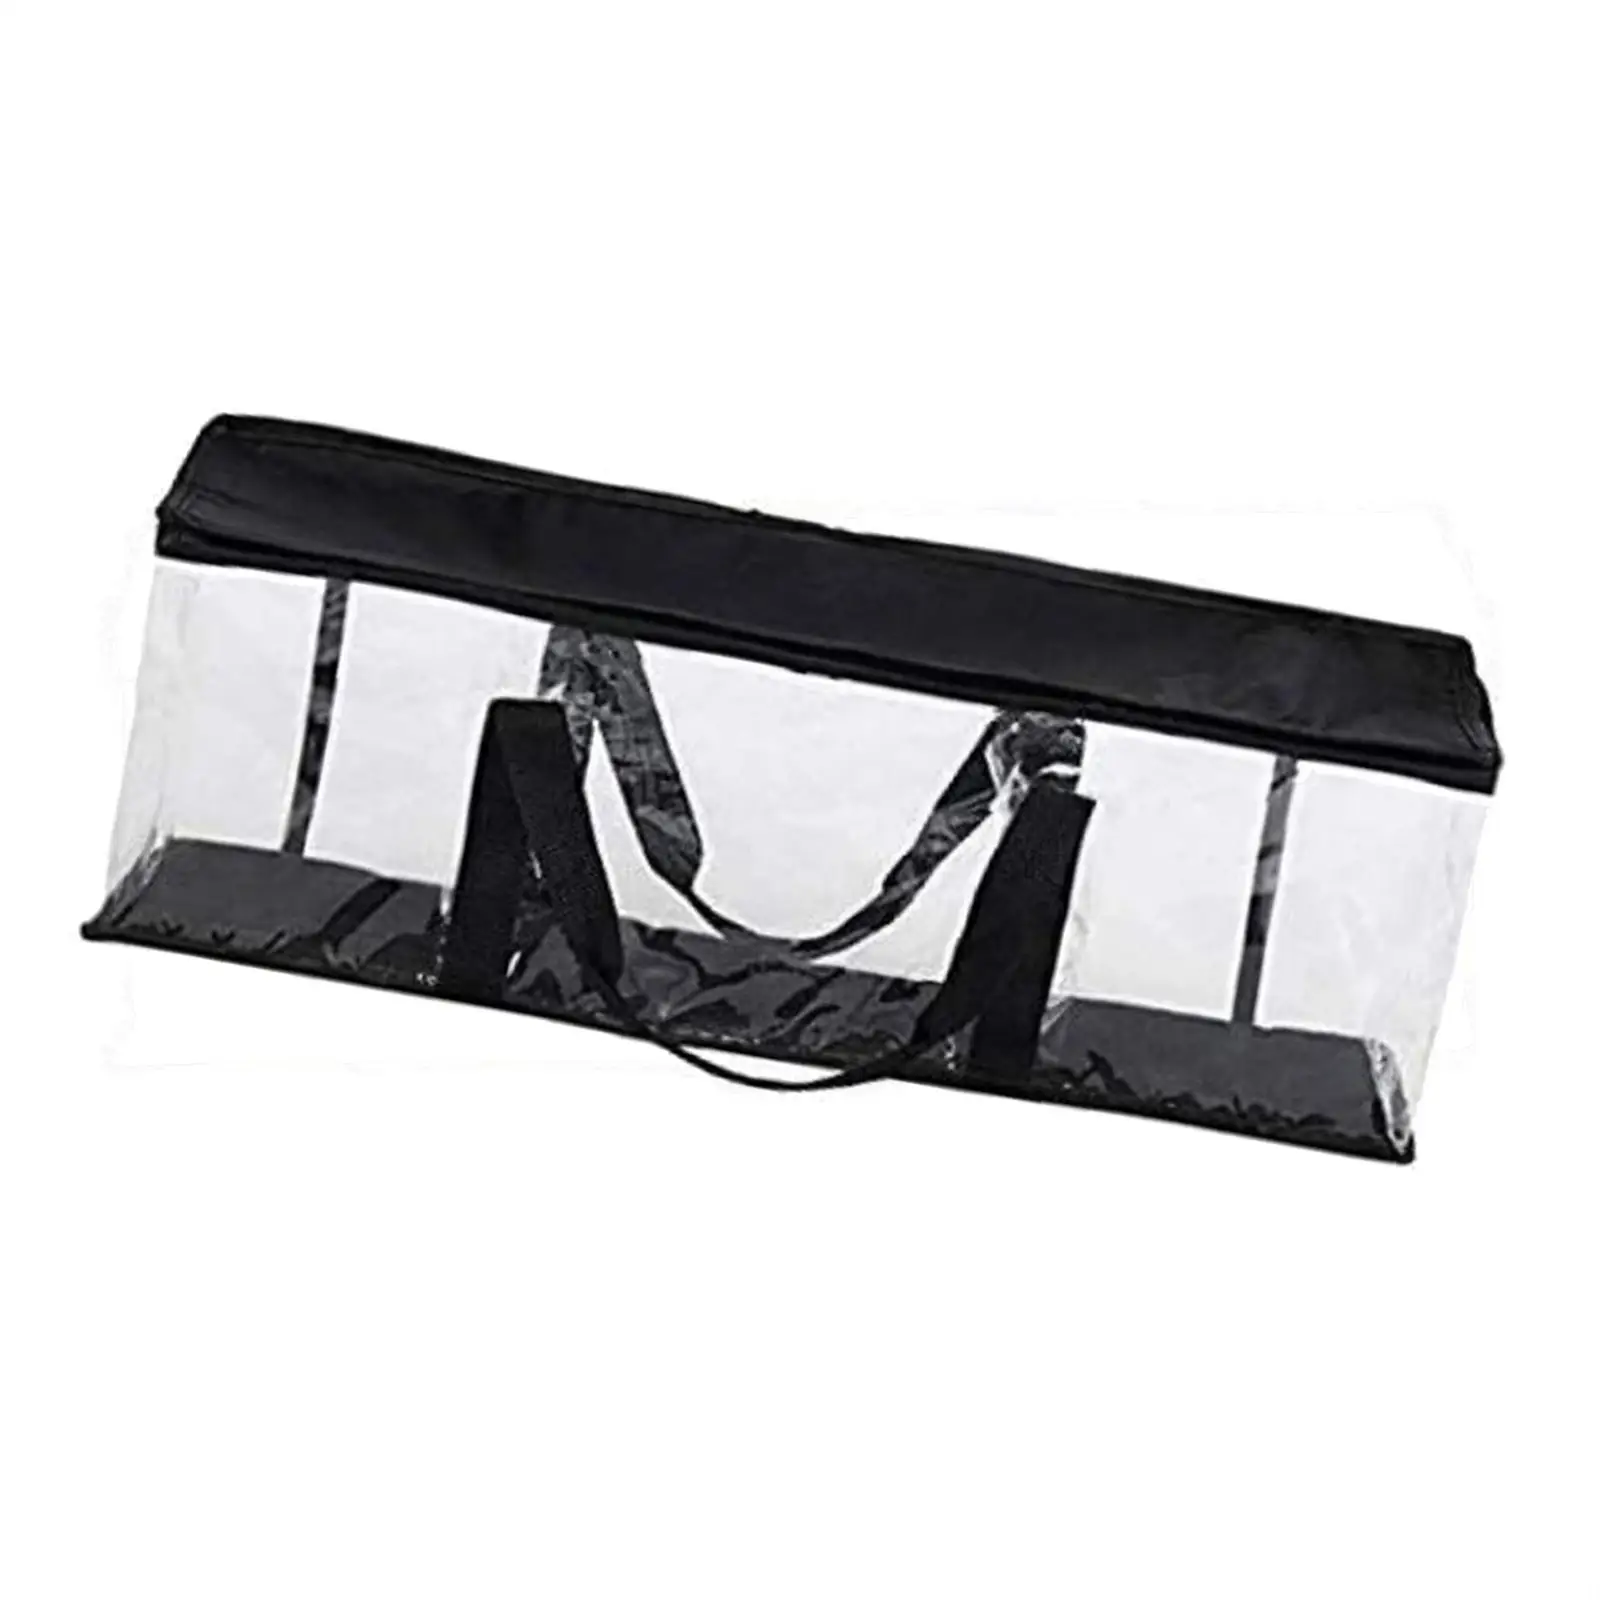 DVD Storage Bag Clear Organizer with Handles Zipper Holder Portable Display for Book Shelf Office